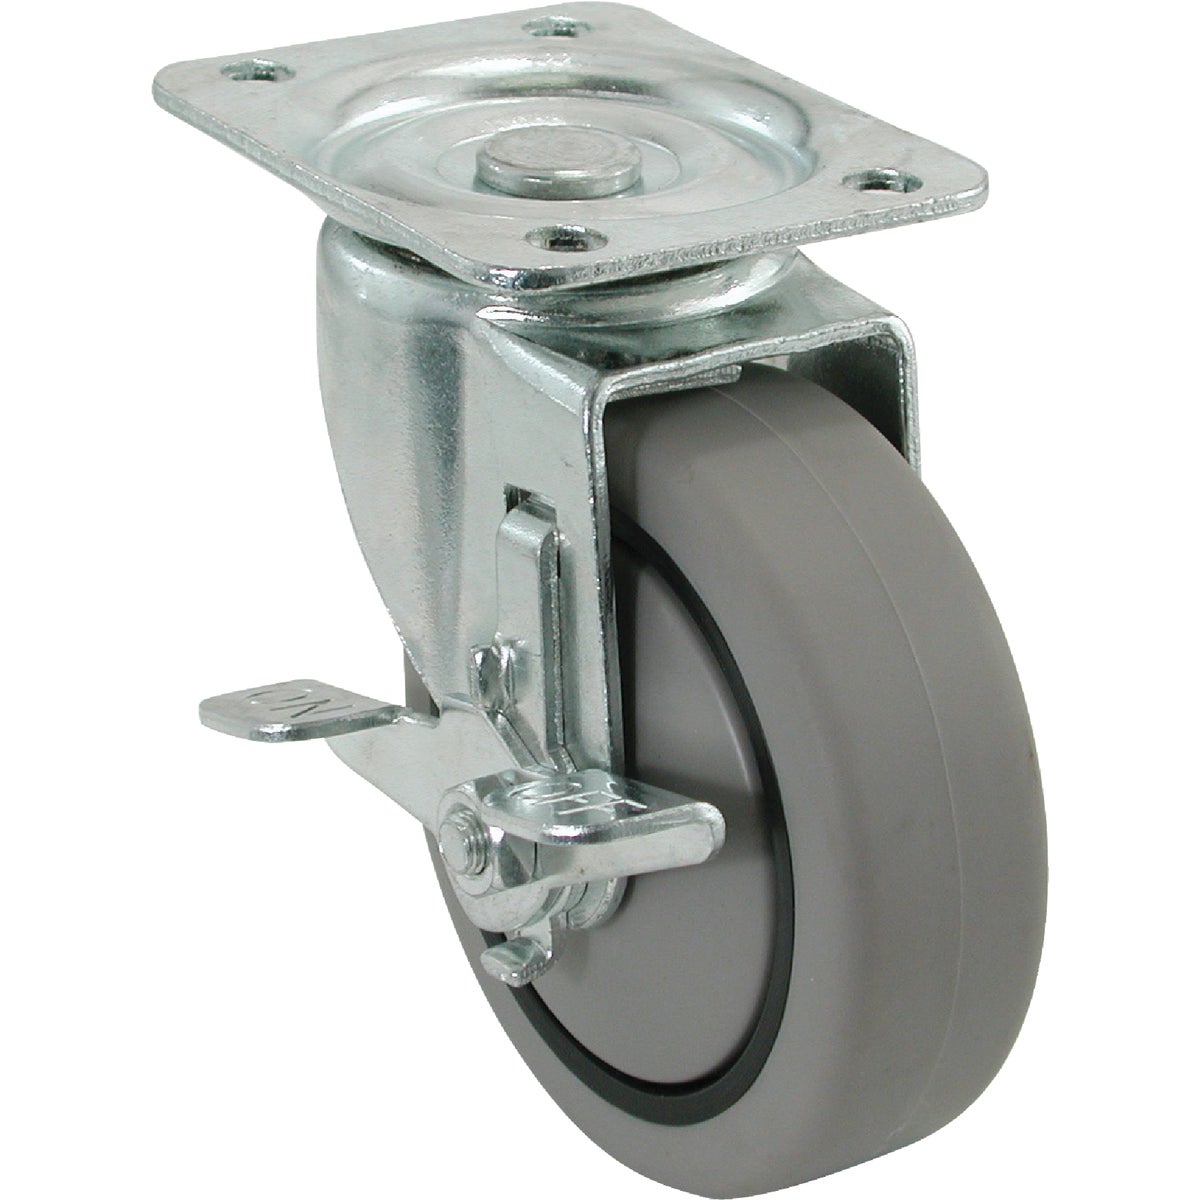 Shepherd 4 In. Thermoplastic Swivel Plate Caster with Brake